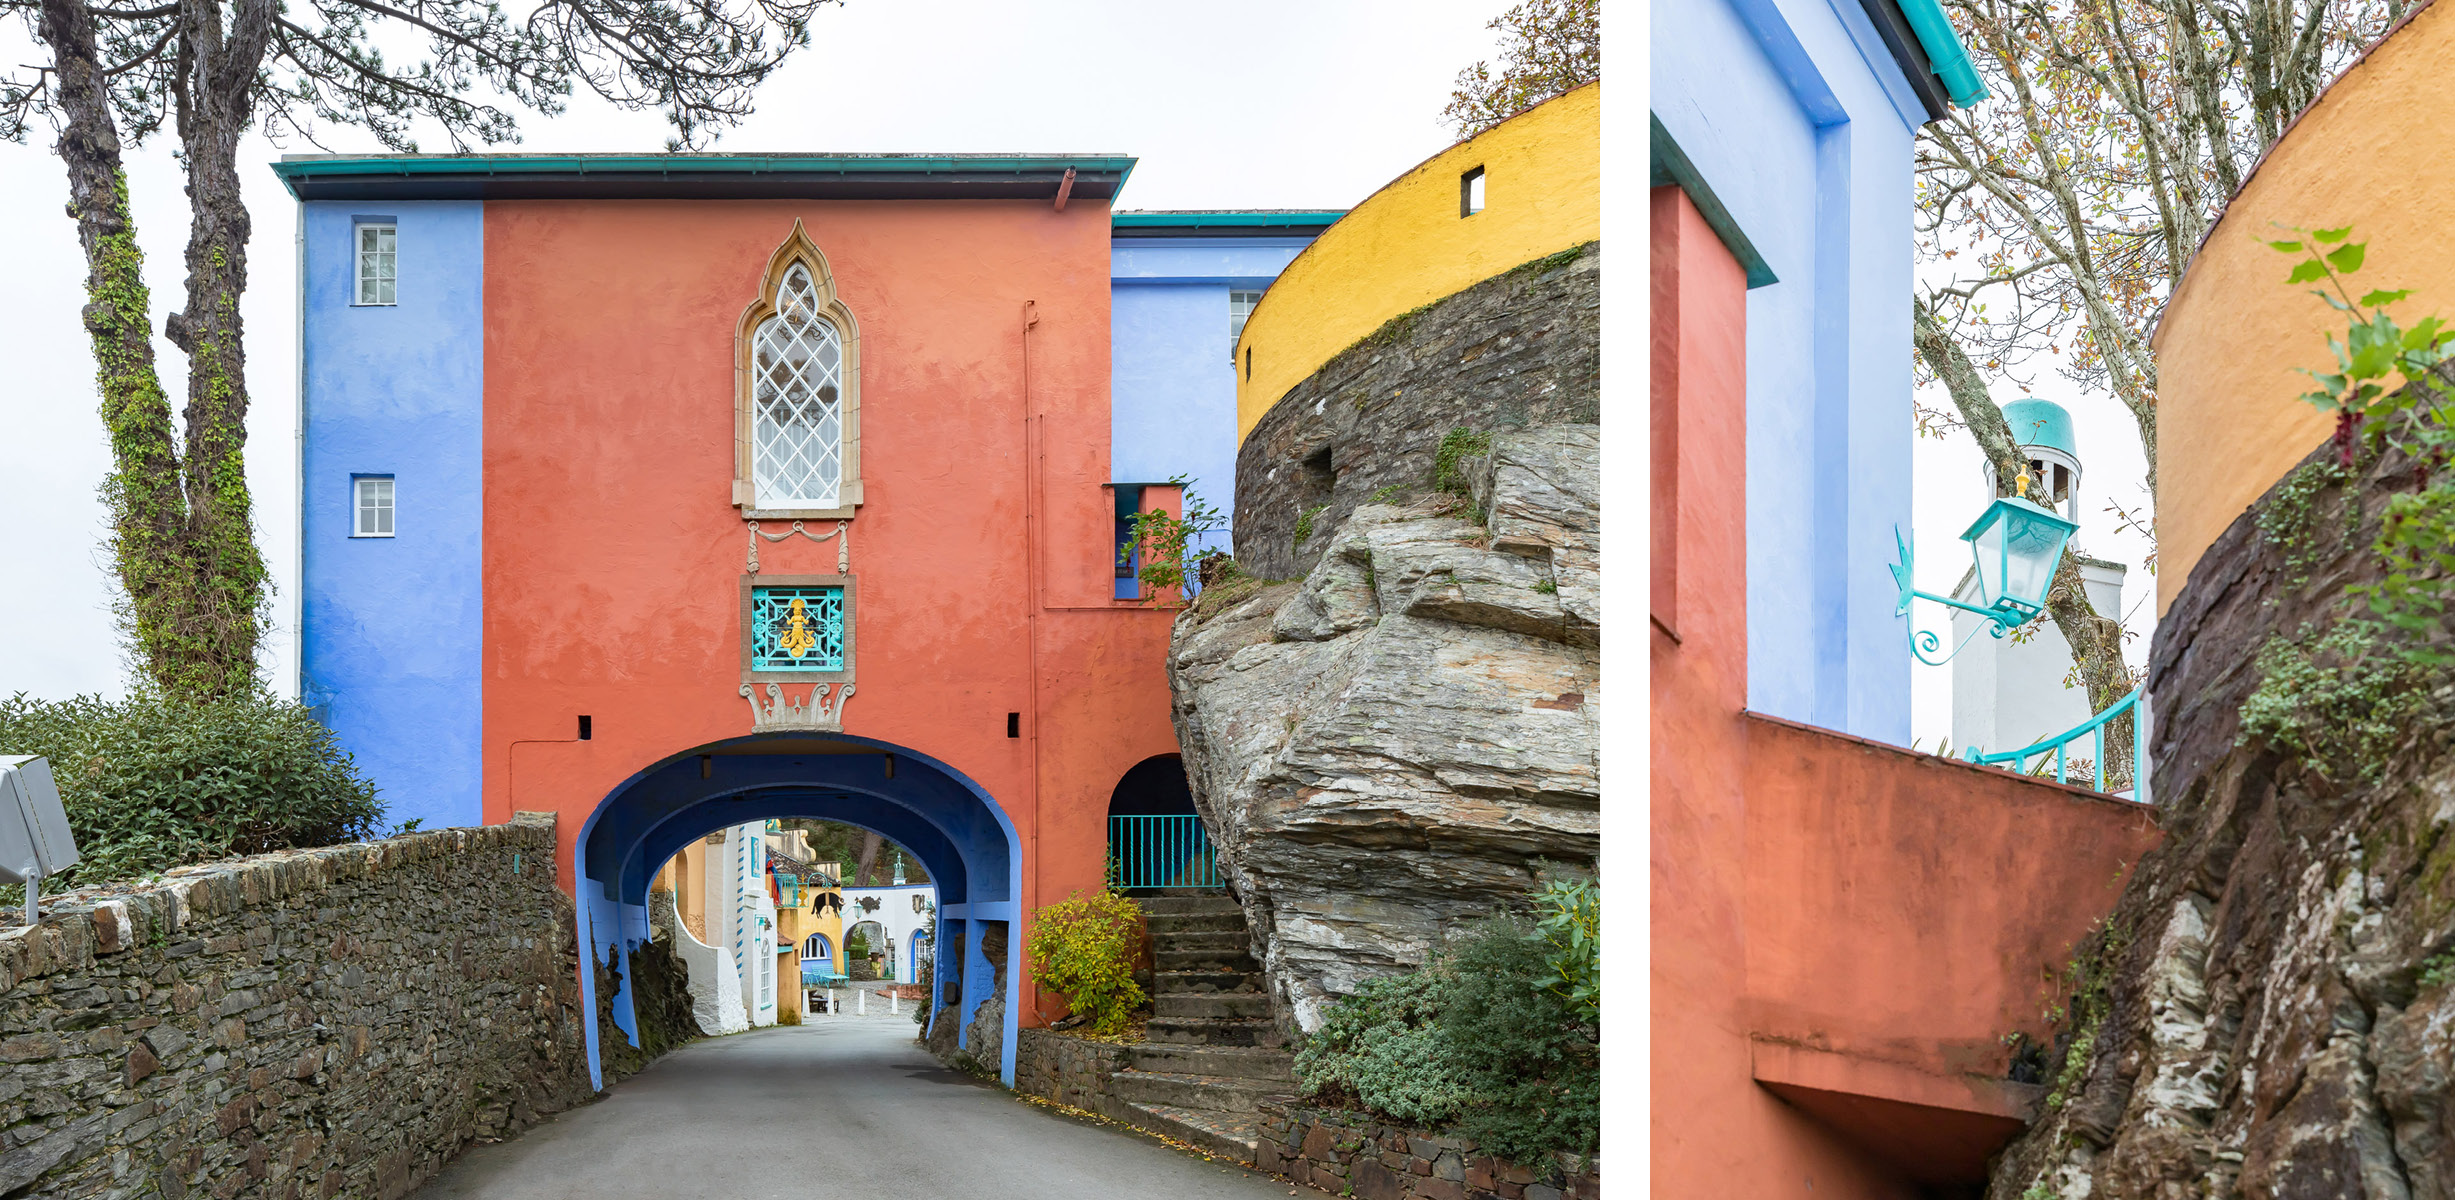 Photos of the colourful side of Tollhouse